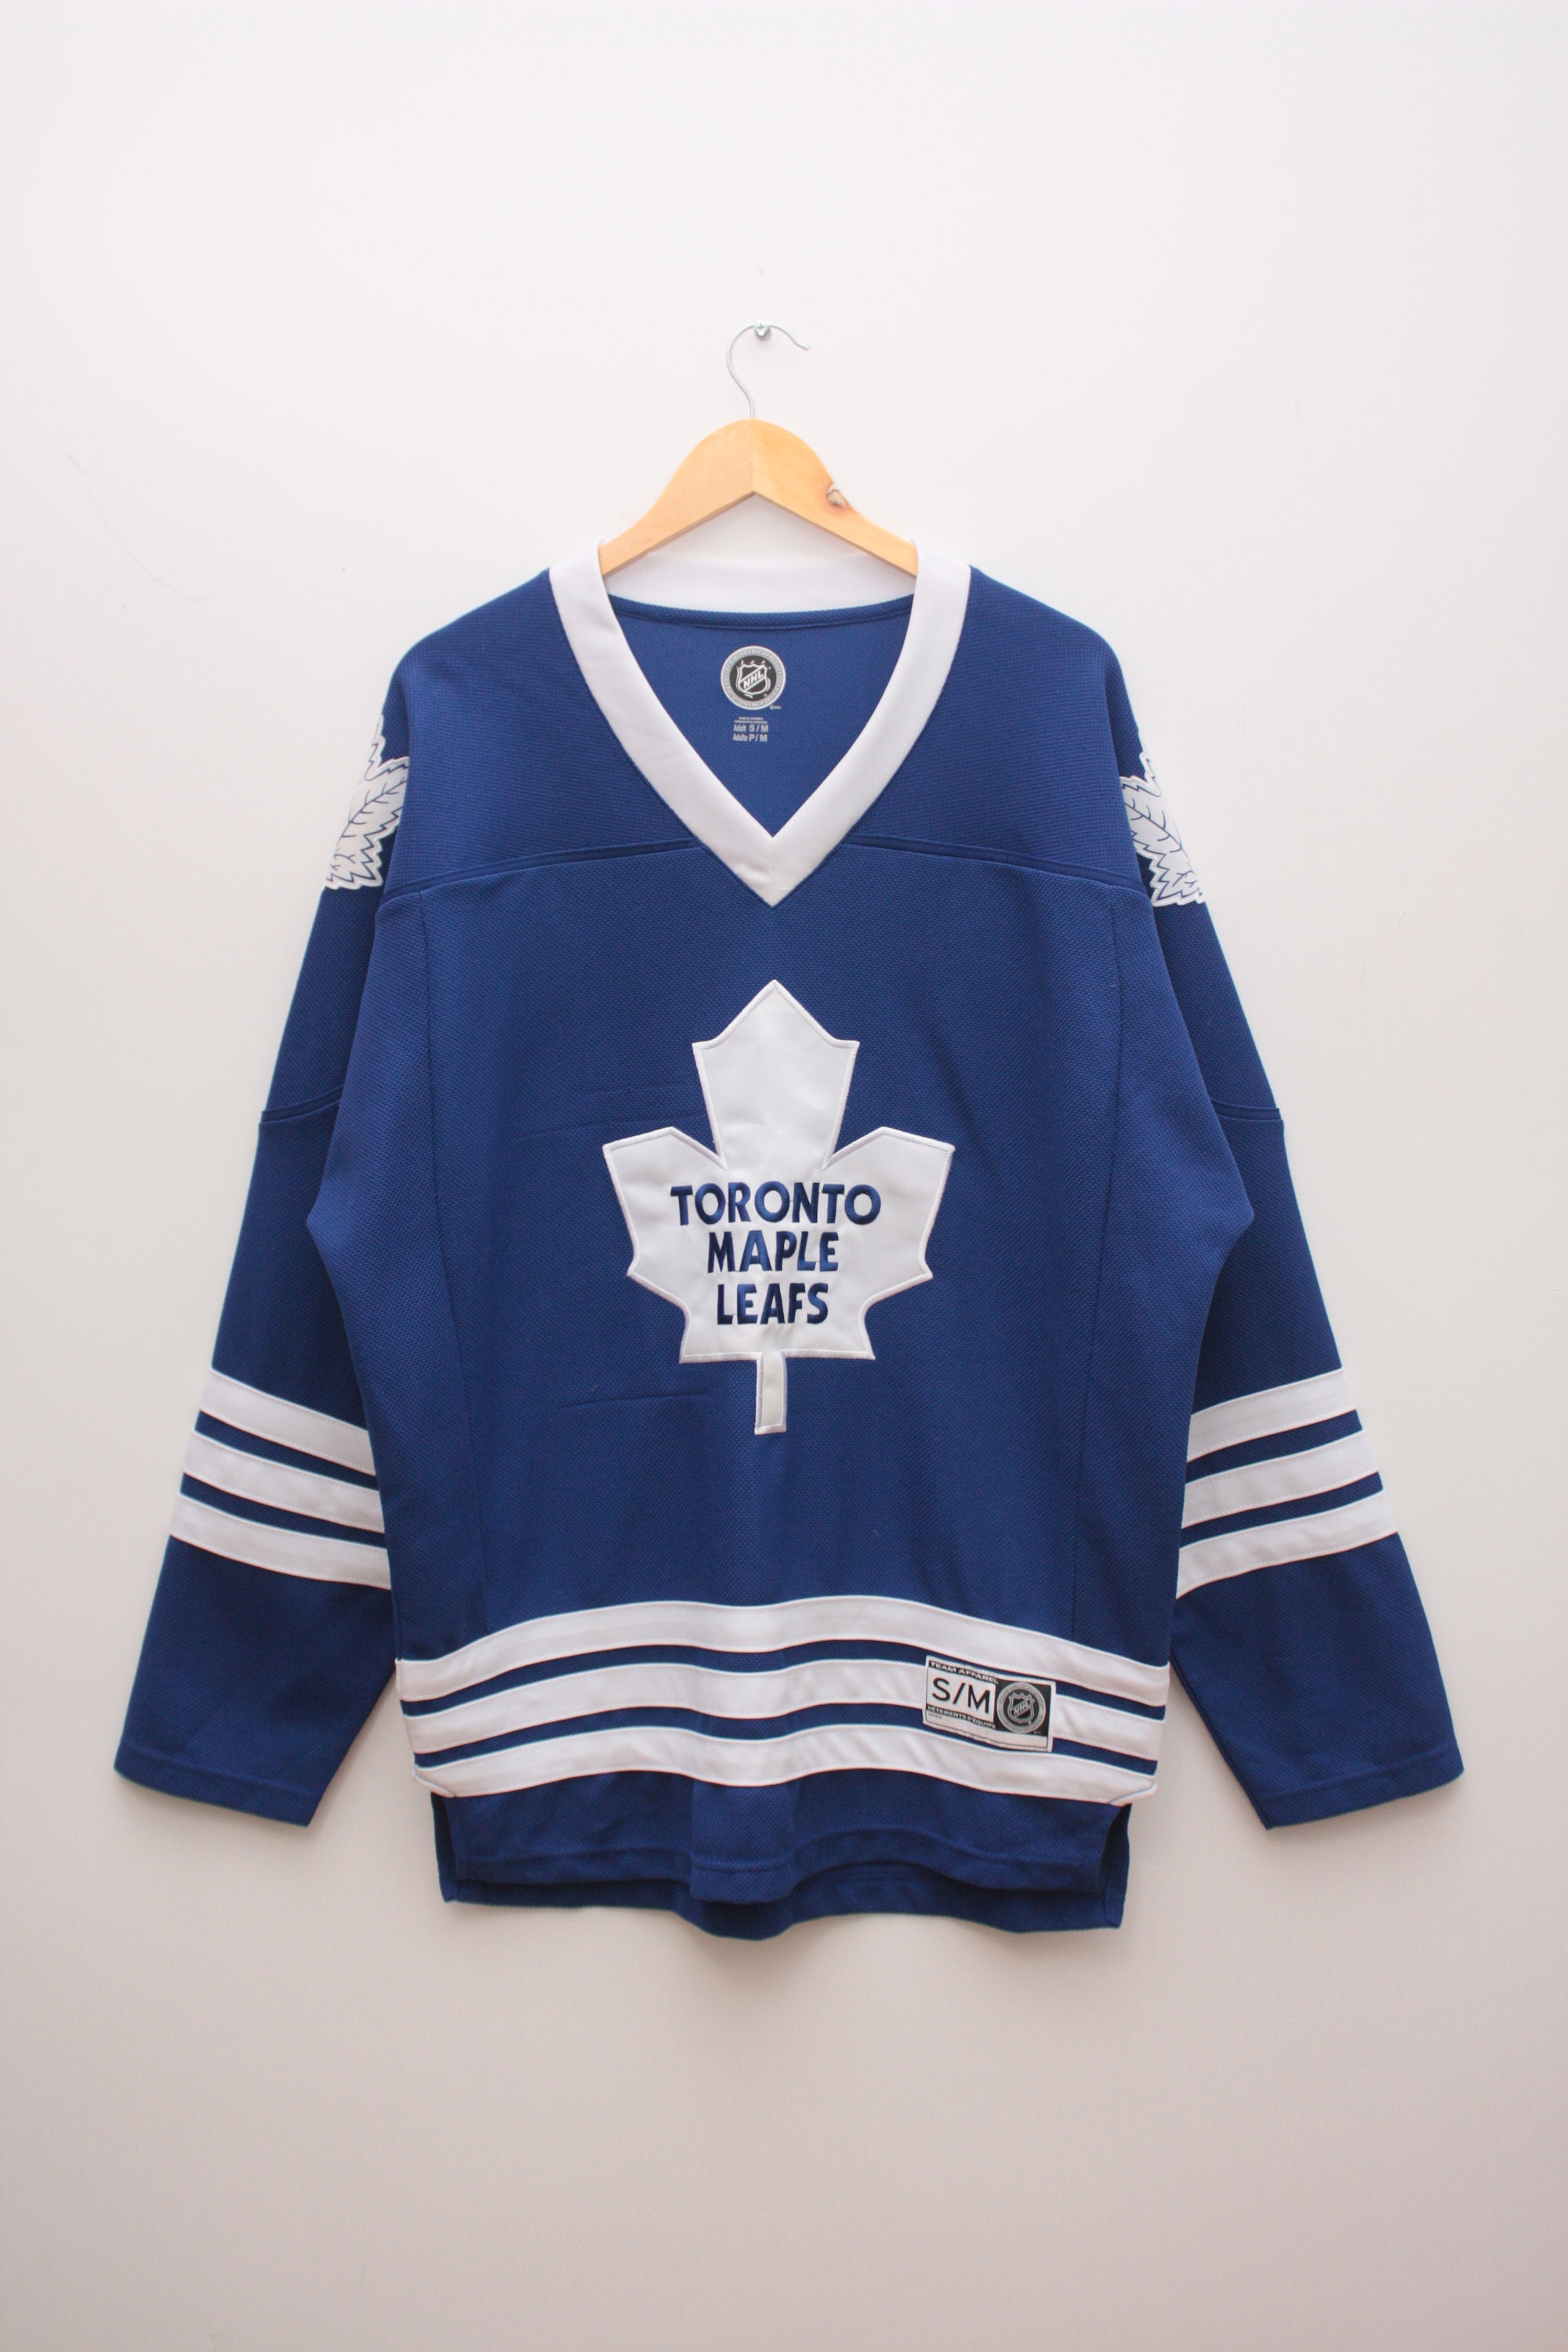 Rare Vintage Toronto Maple Leafs NHL Jersey Bauer 1960s or 1970s Made in  Canada